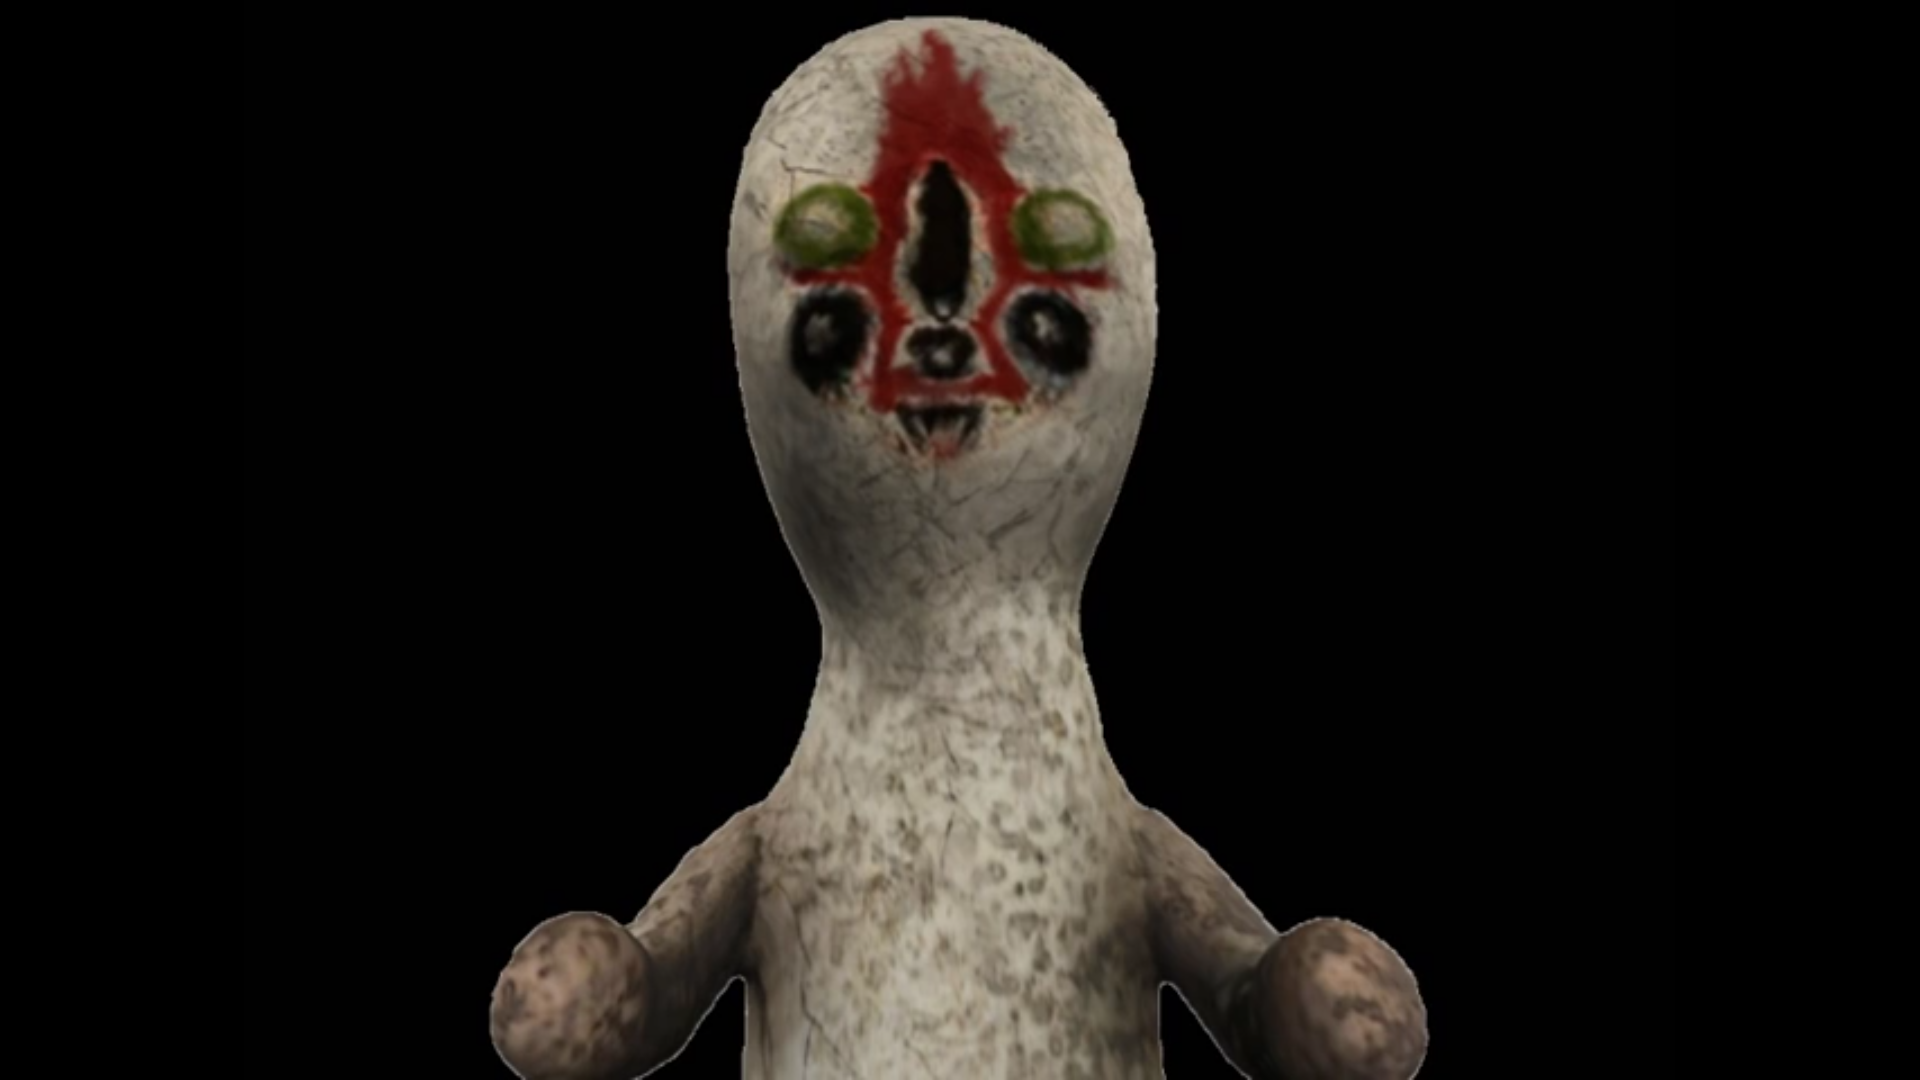 Scp 001